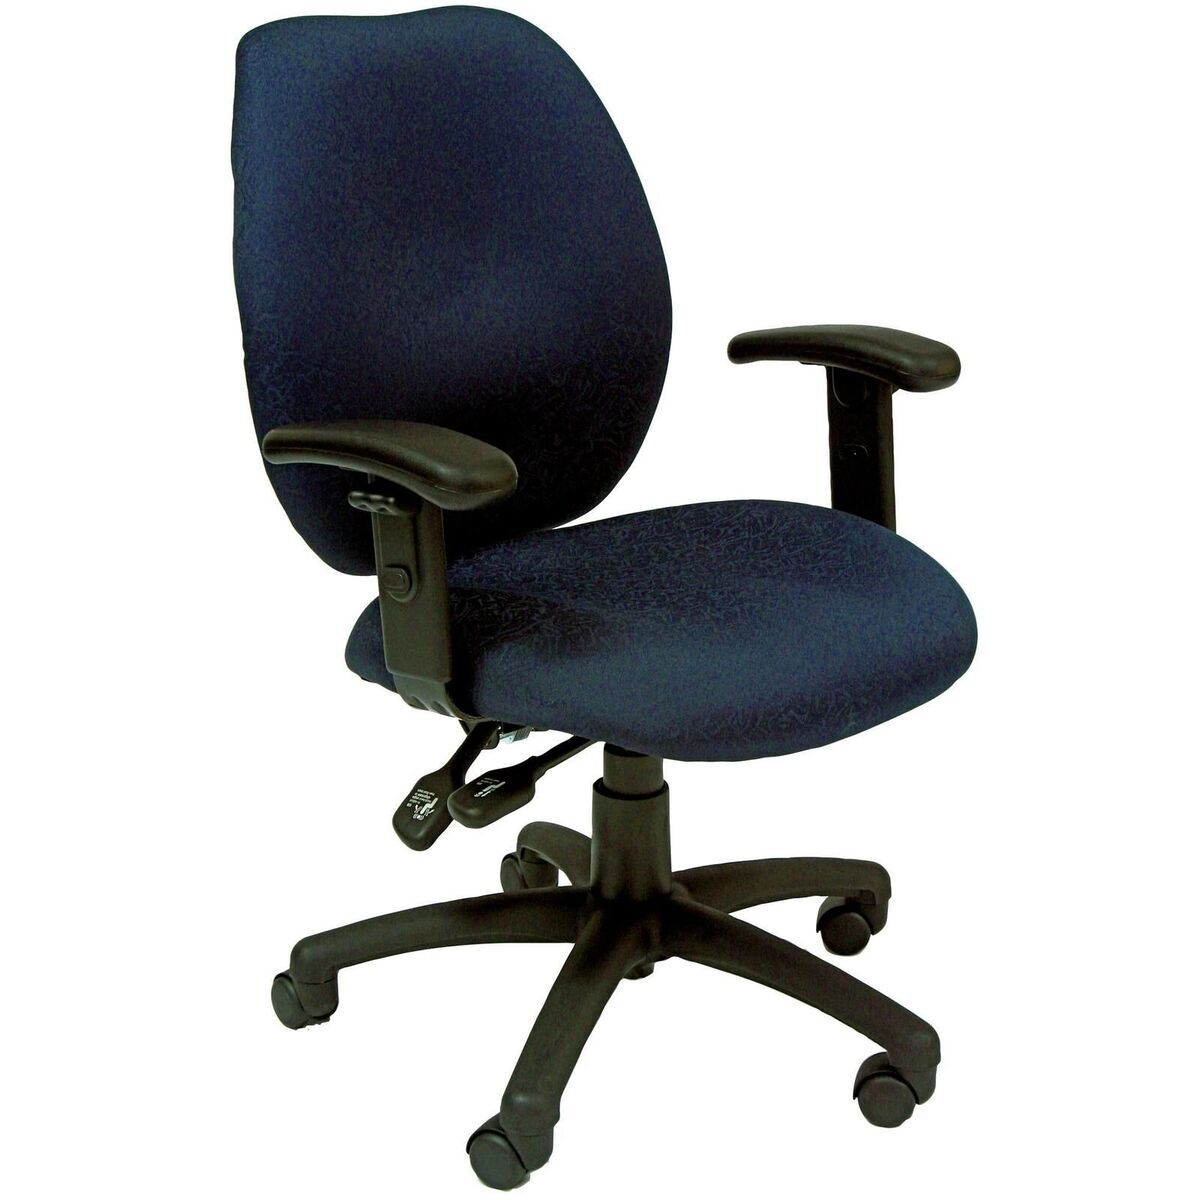 YSD SABINA TASK CHAIR WITH ARMS Blue 5 Year Warranty